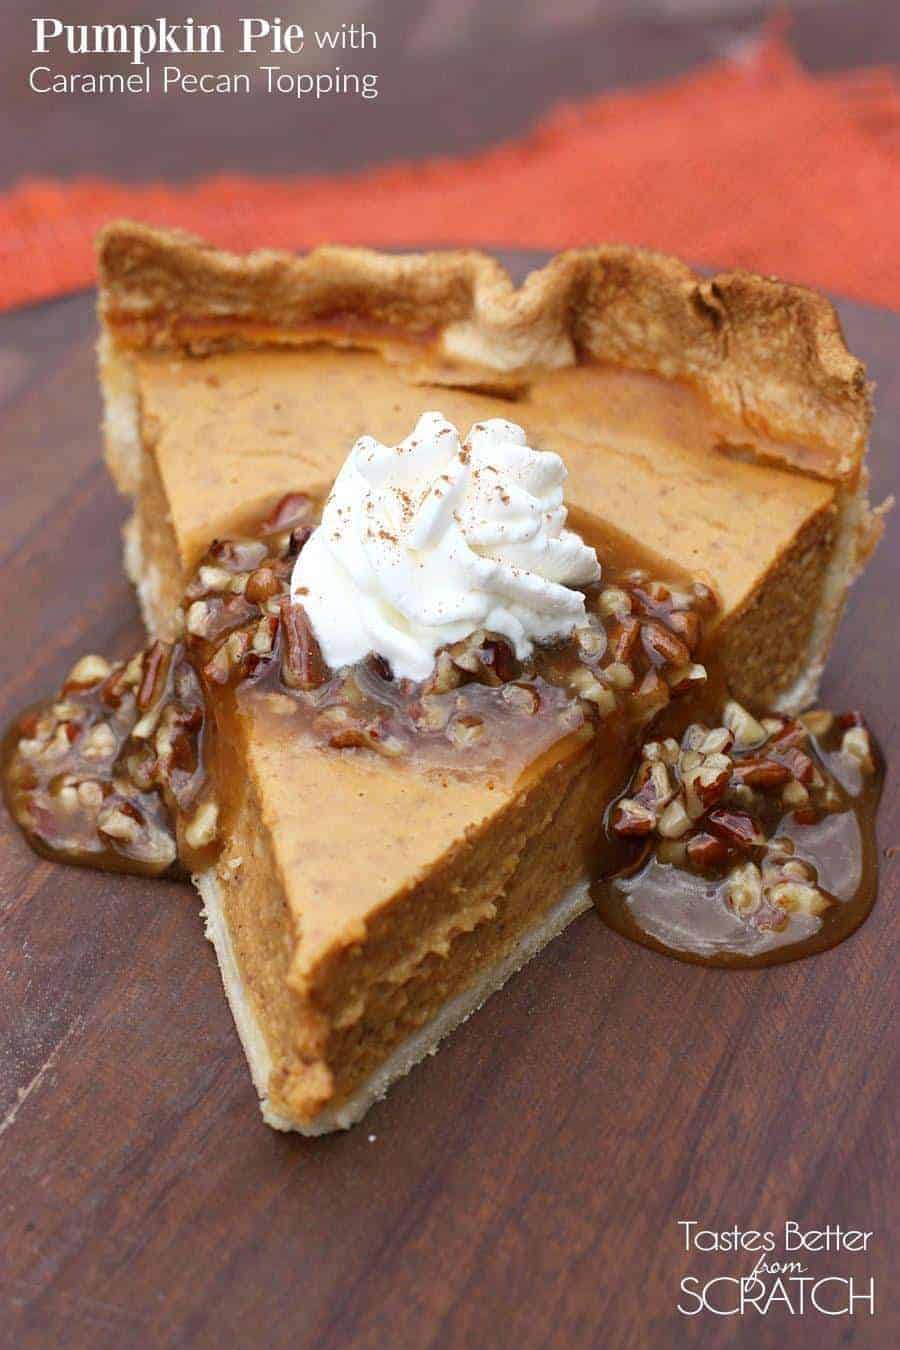 Pumpkin Pie with Caramel Pecan Topping by Tastes Better From Scratch | Pumpkin Pie Recipes and Pumpkin Pie Flavored Recipes! 